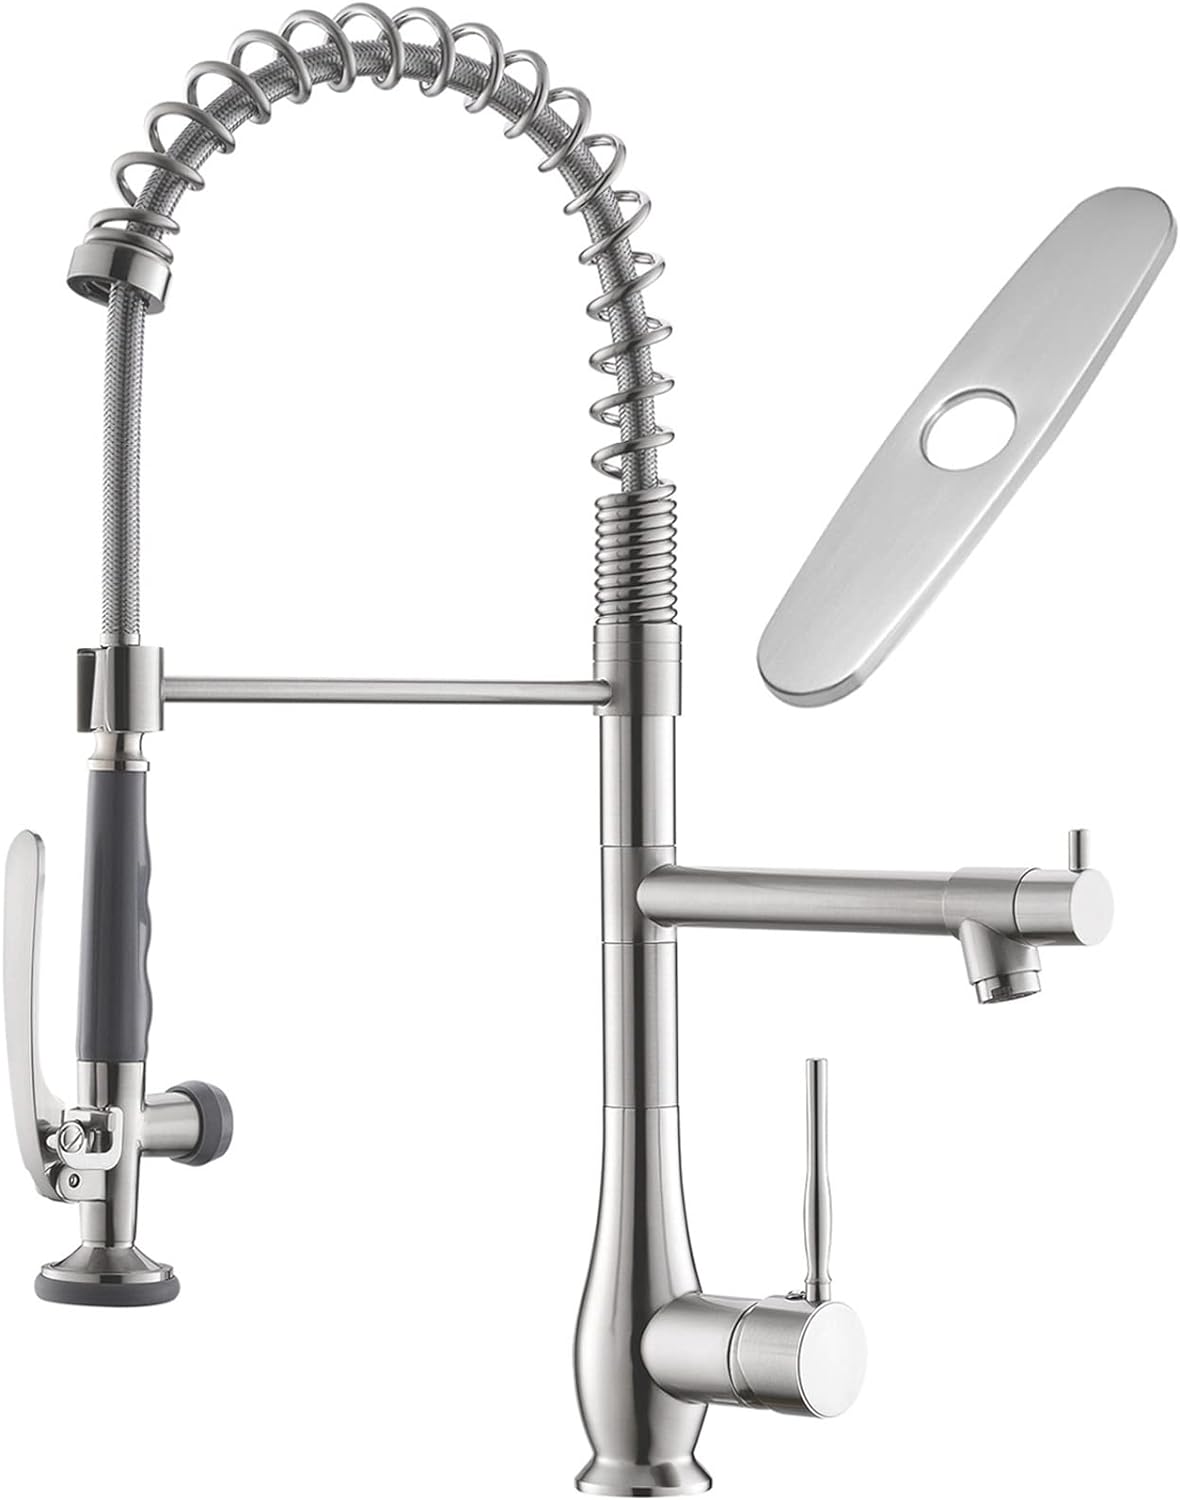 GIMILI Kitchen Faucet with Pull Down Sprayer, Single Handle High Pressure Kitchen Sink Faucet, Commercial Double-Headed Stainless Steel Kitchen Faucets Sink with Deck Plate, Brushed Nickel